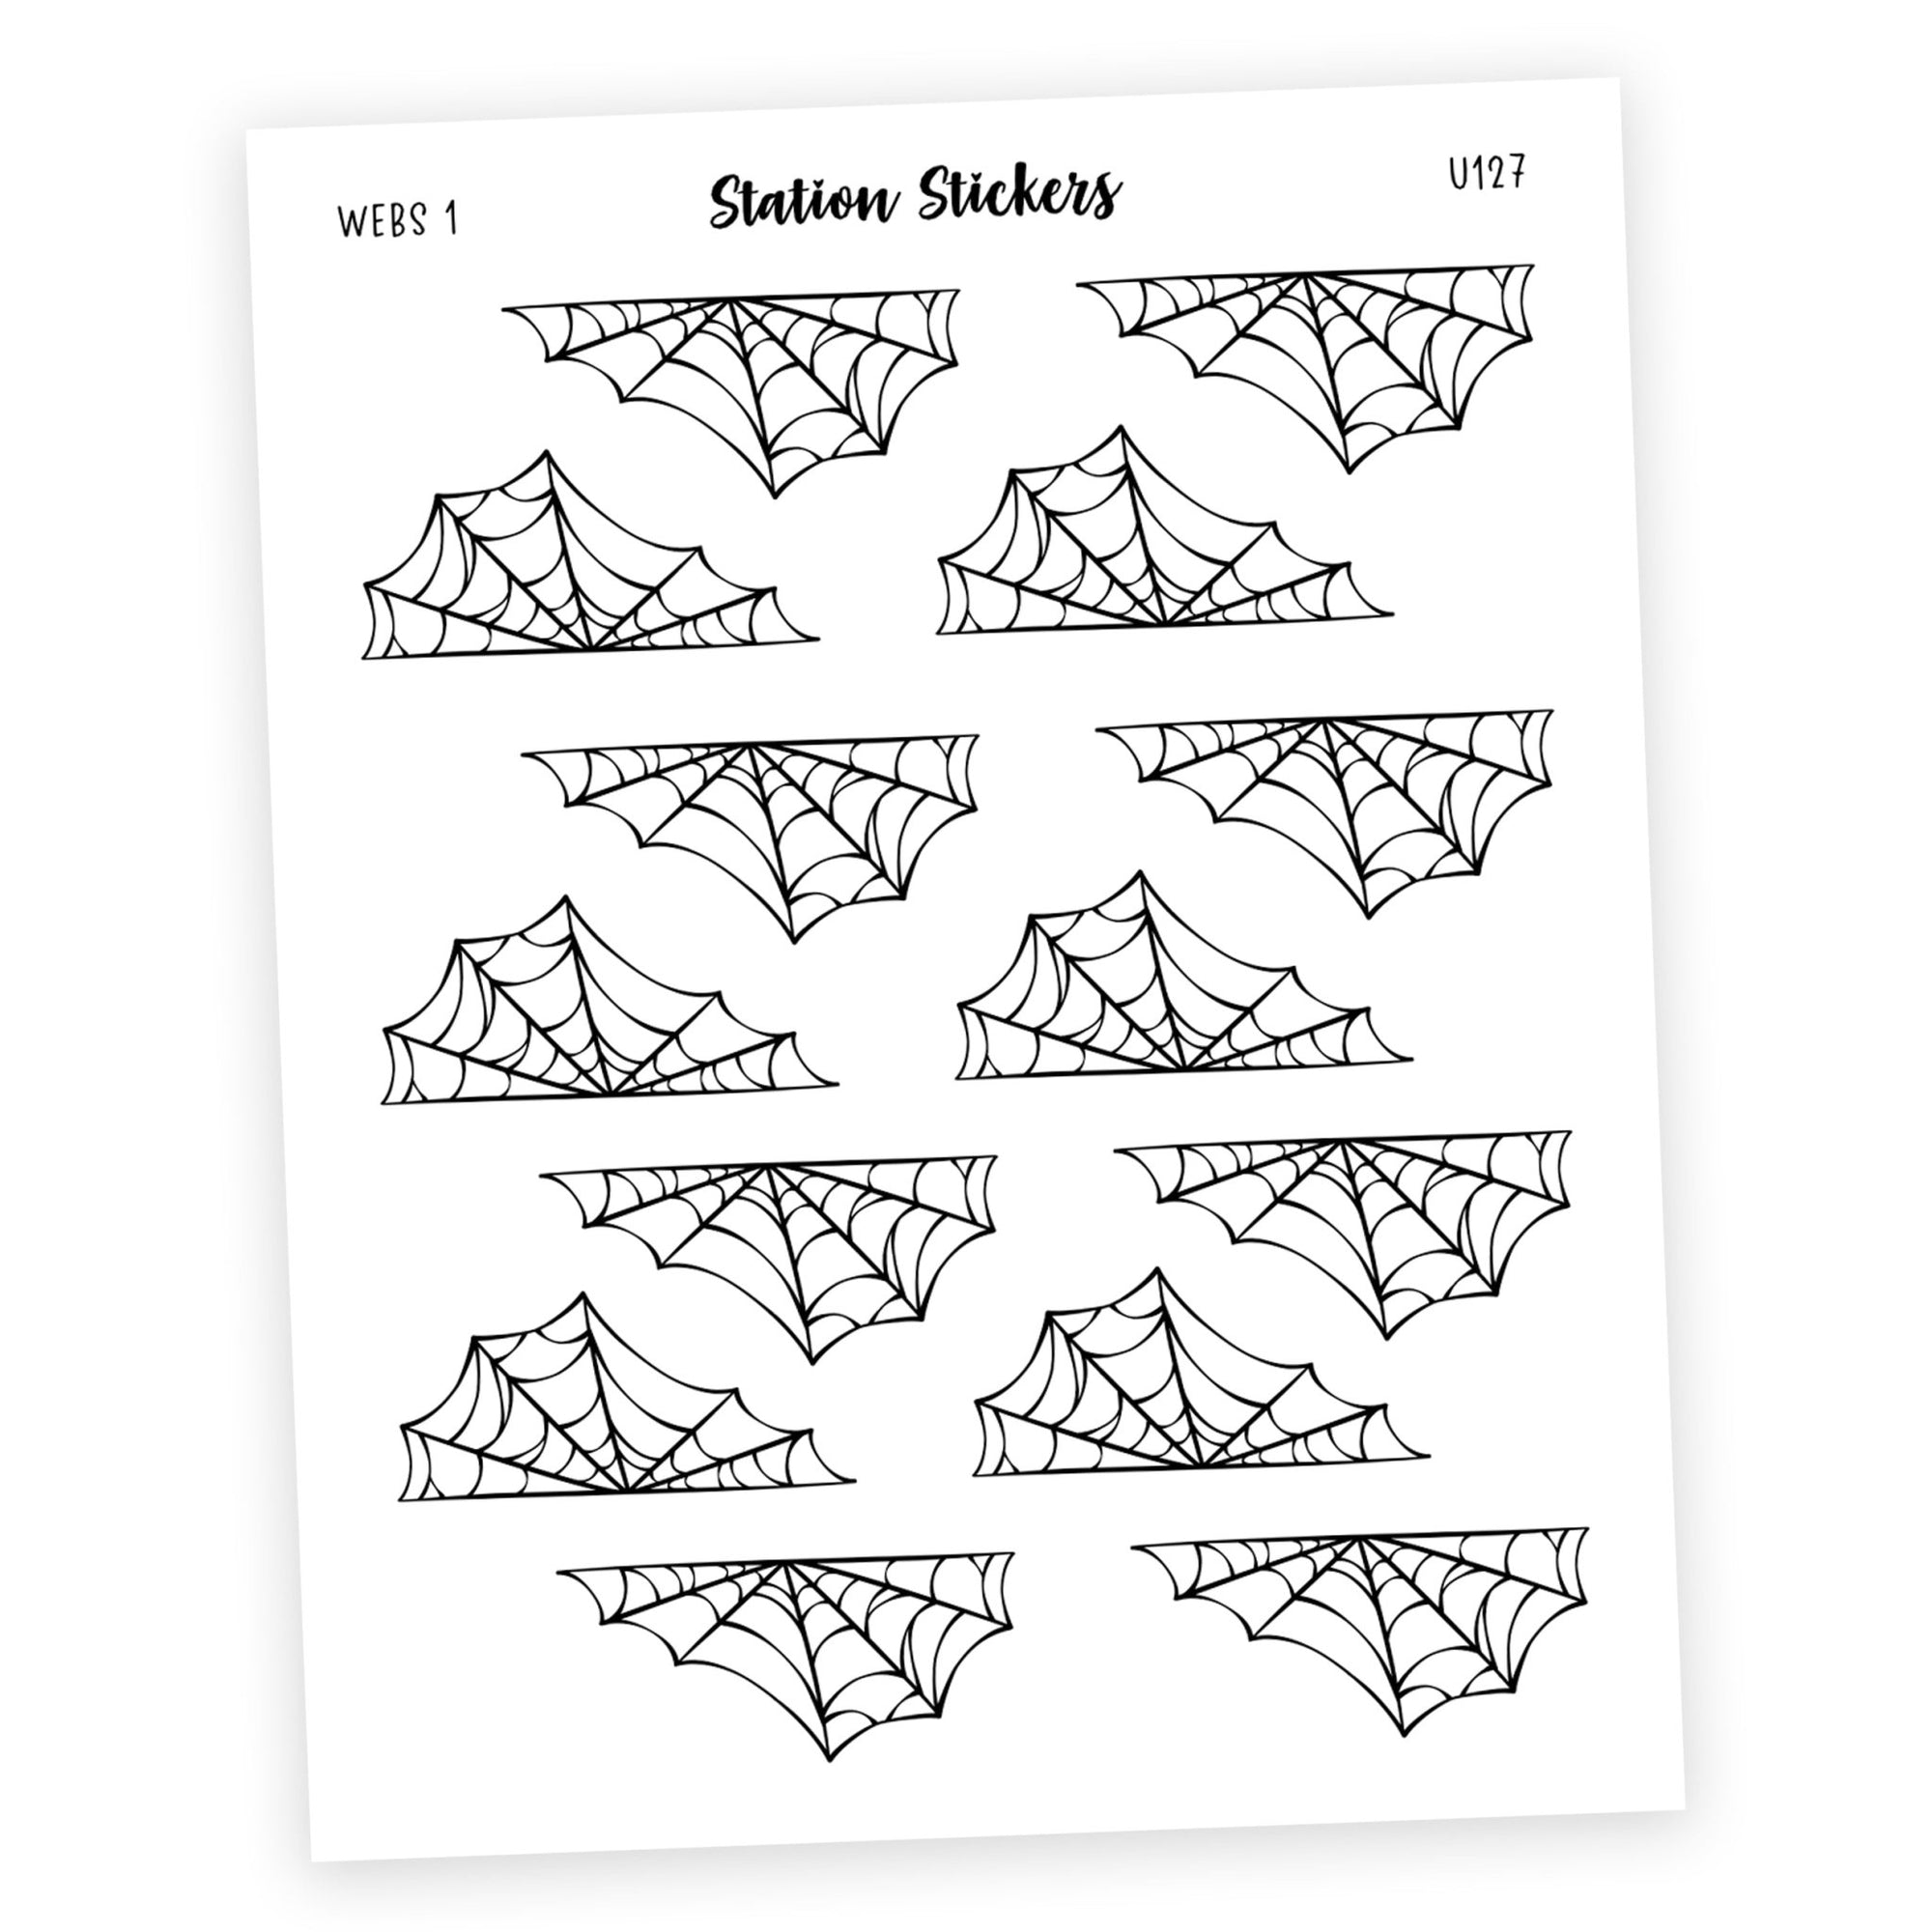 DECO • WEBS 1 - Station Stickers